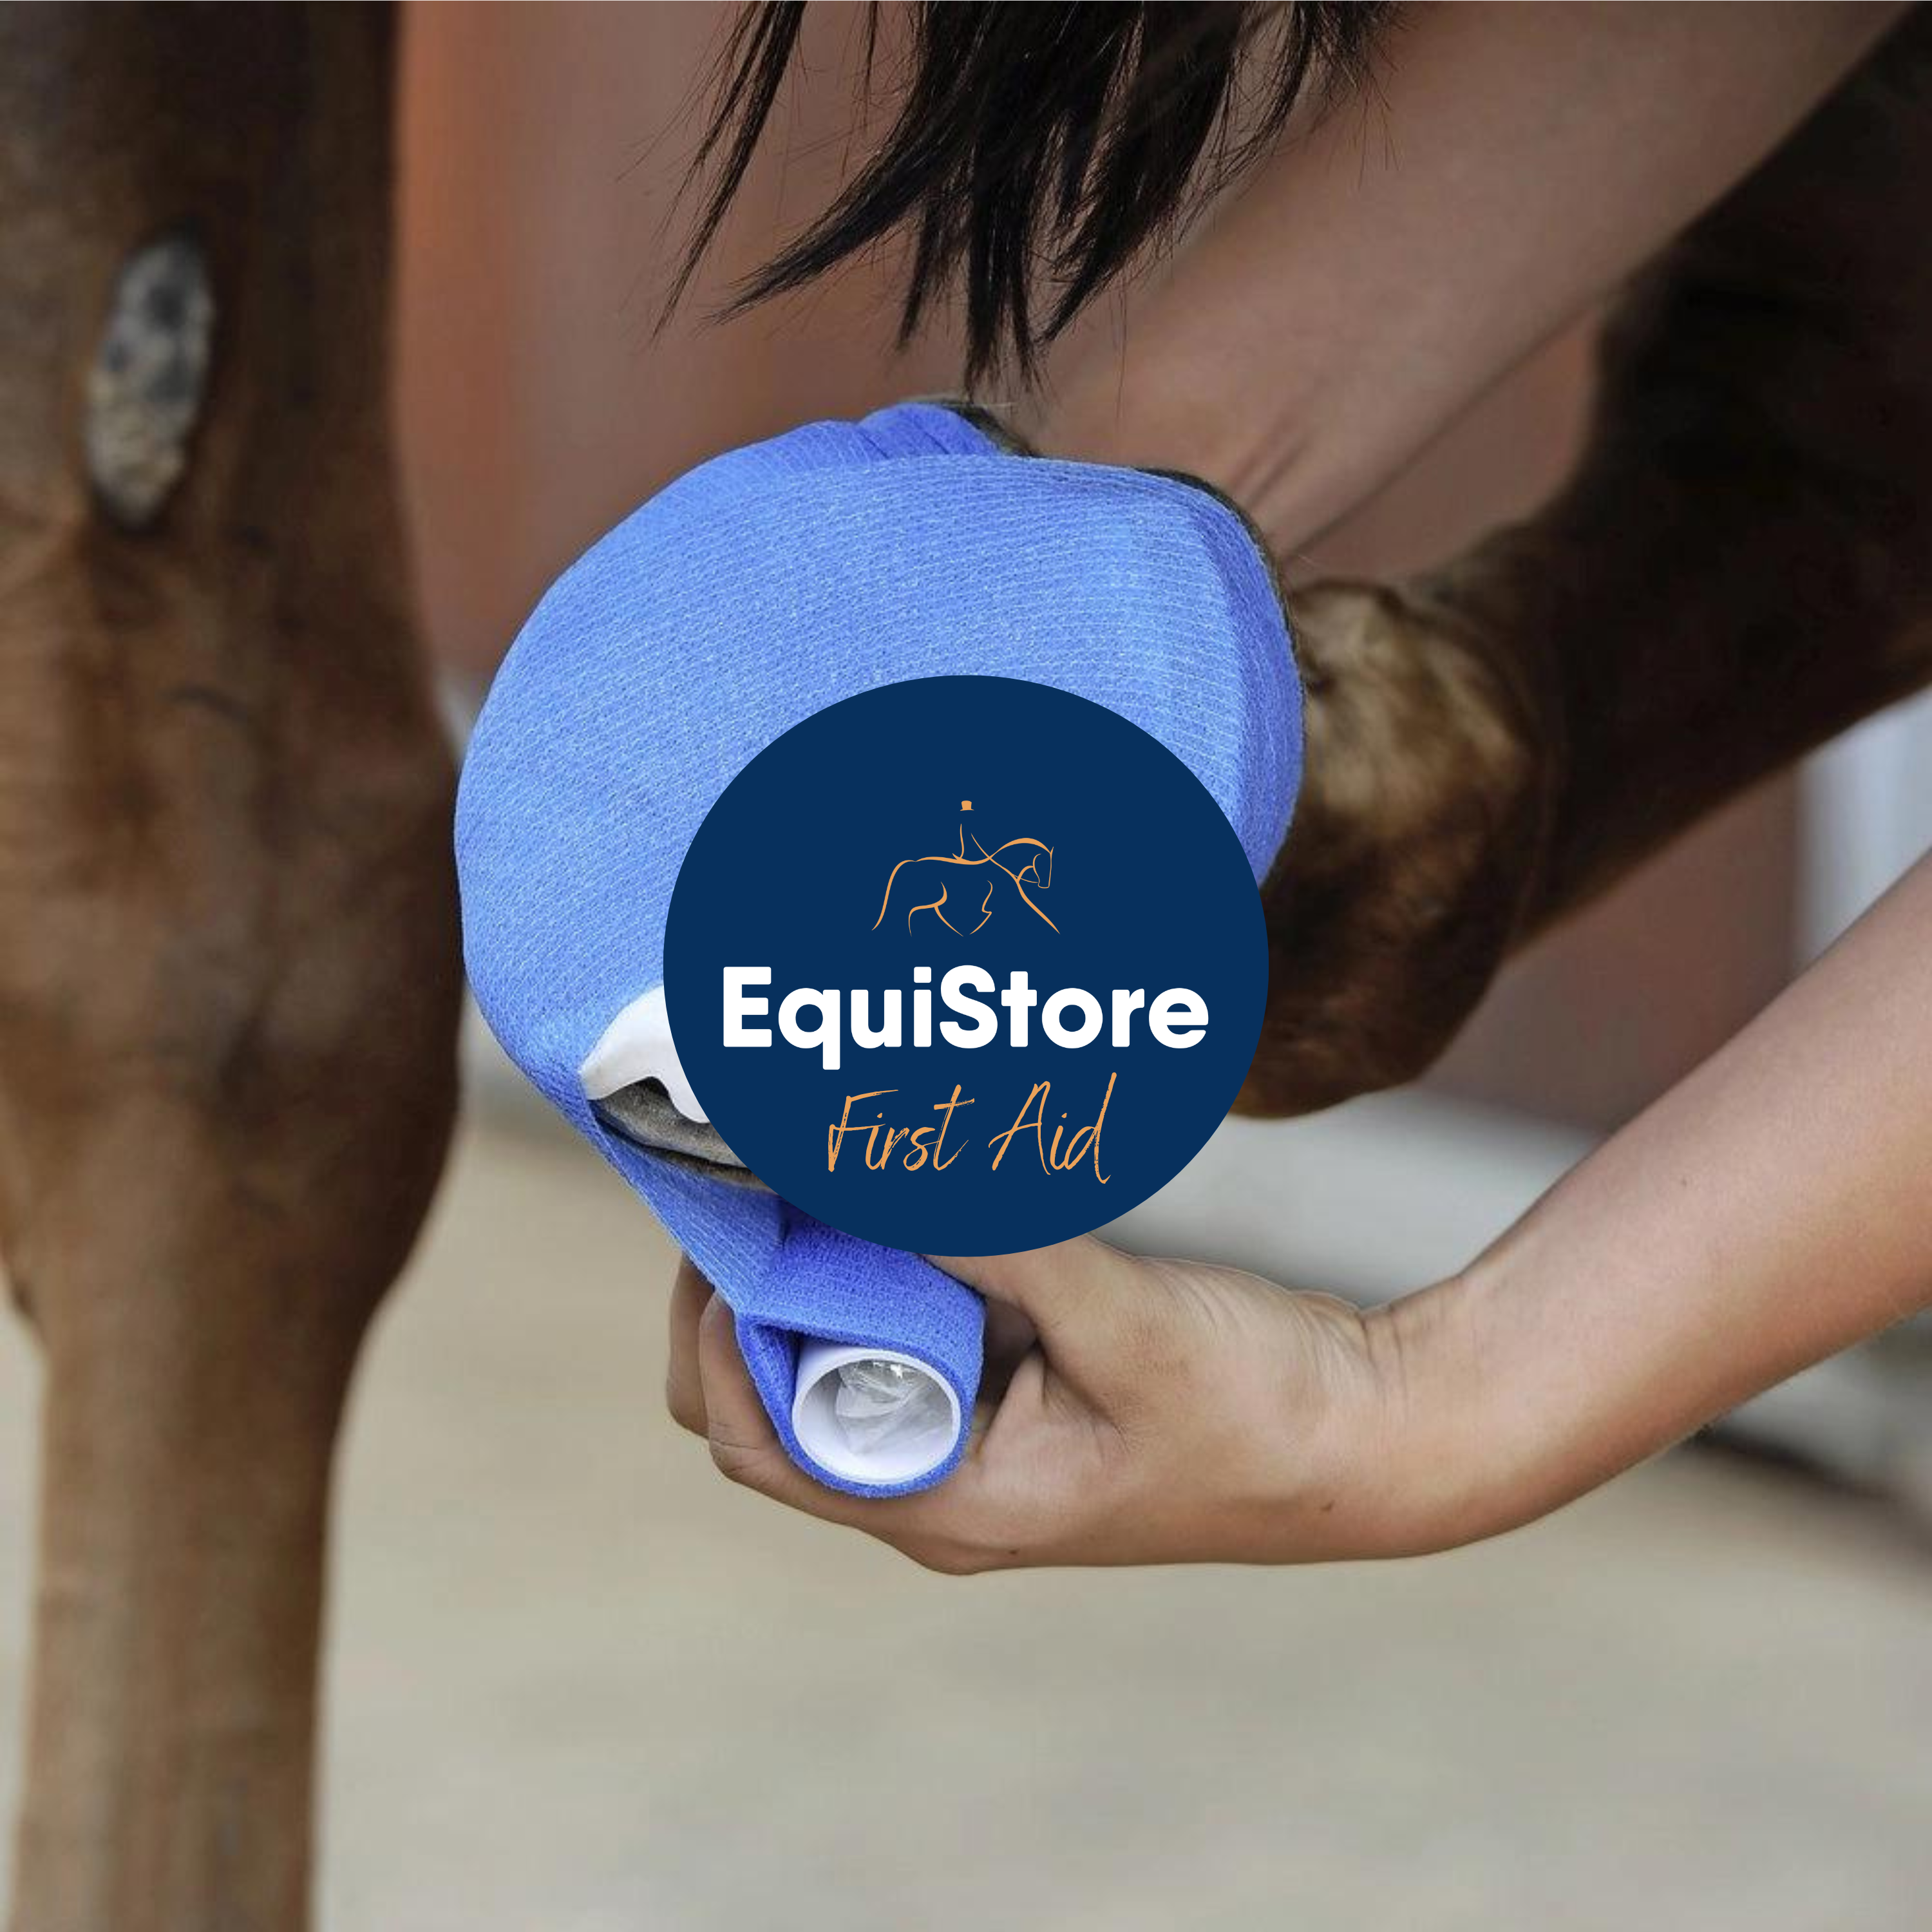 A wide selection of first aid supplies for your horses first aid kit. Available in Ireland at Equistore. 